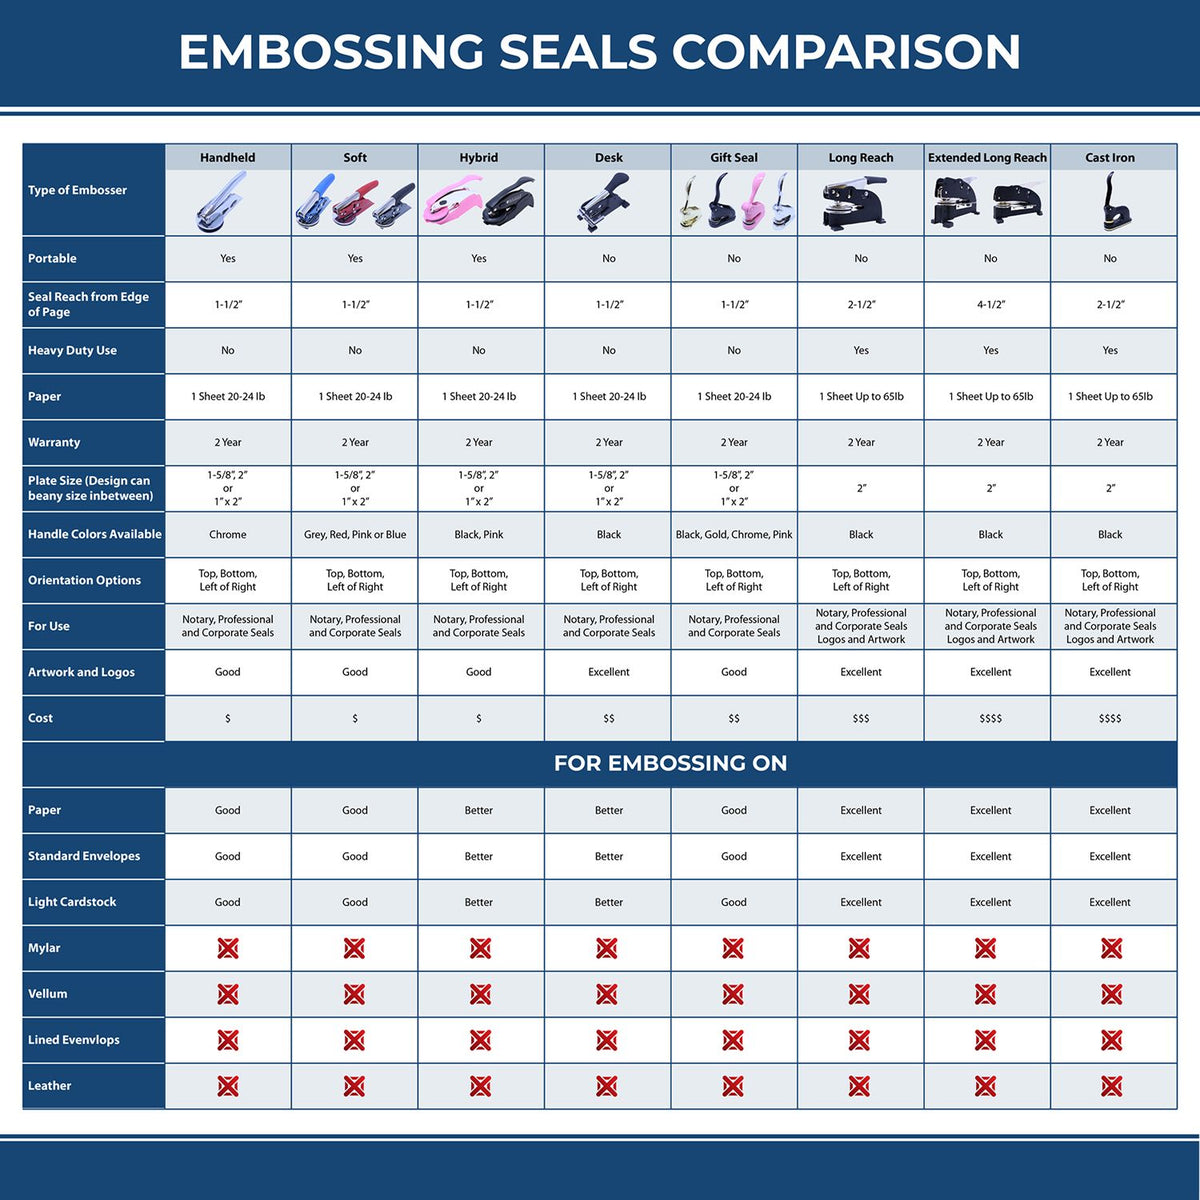 A comparison chart for the different types of mount models available for the Soft Pocket South Carolina Landscape Architect Embosser.